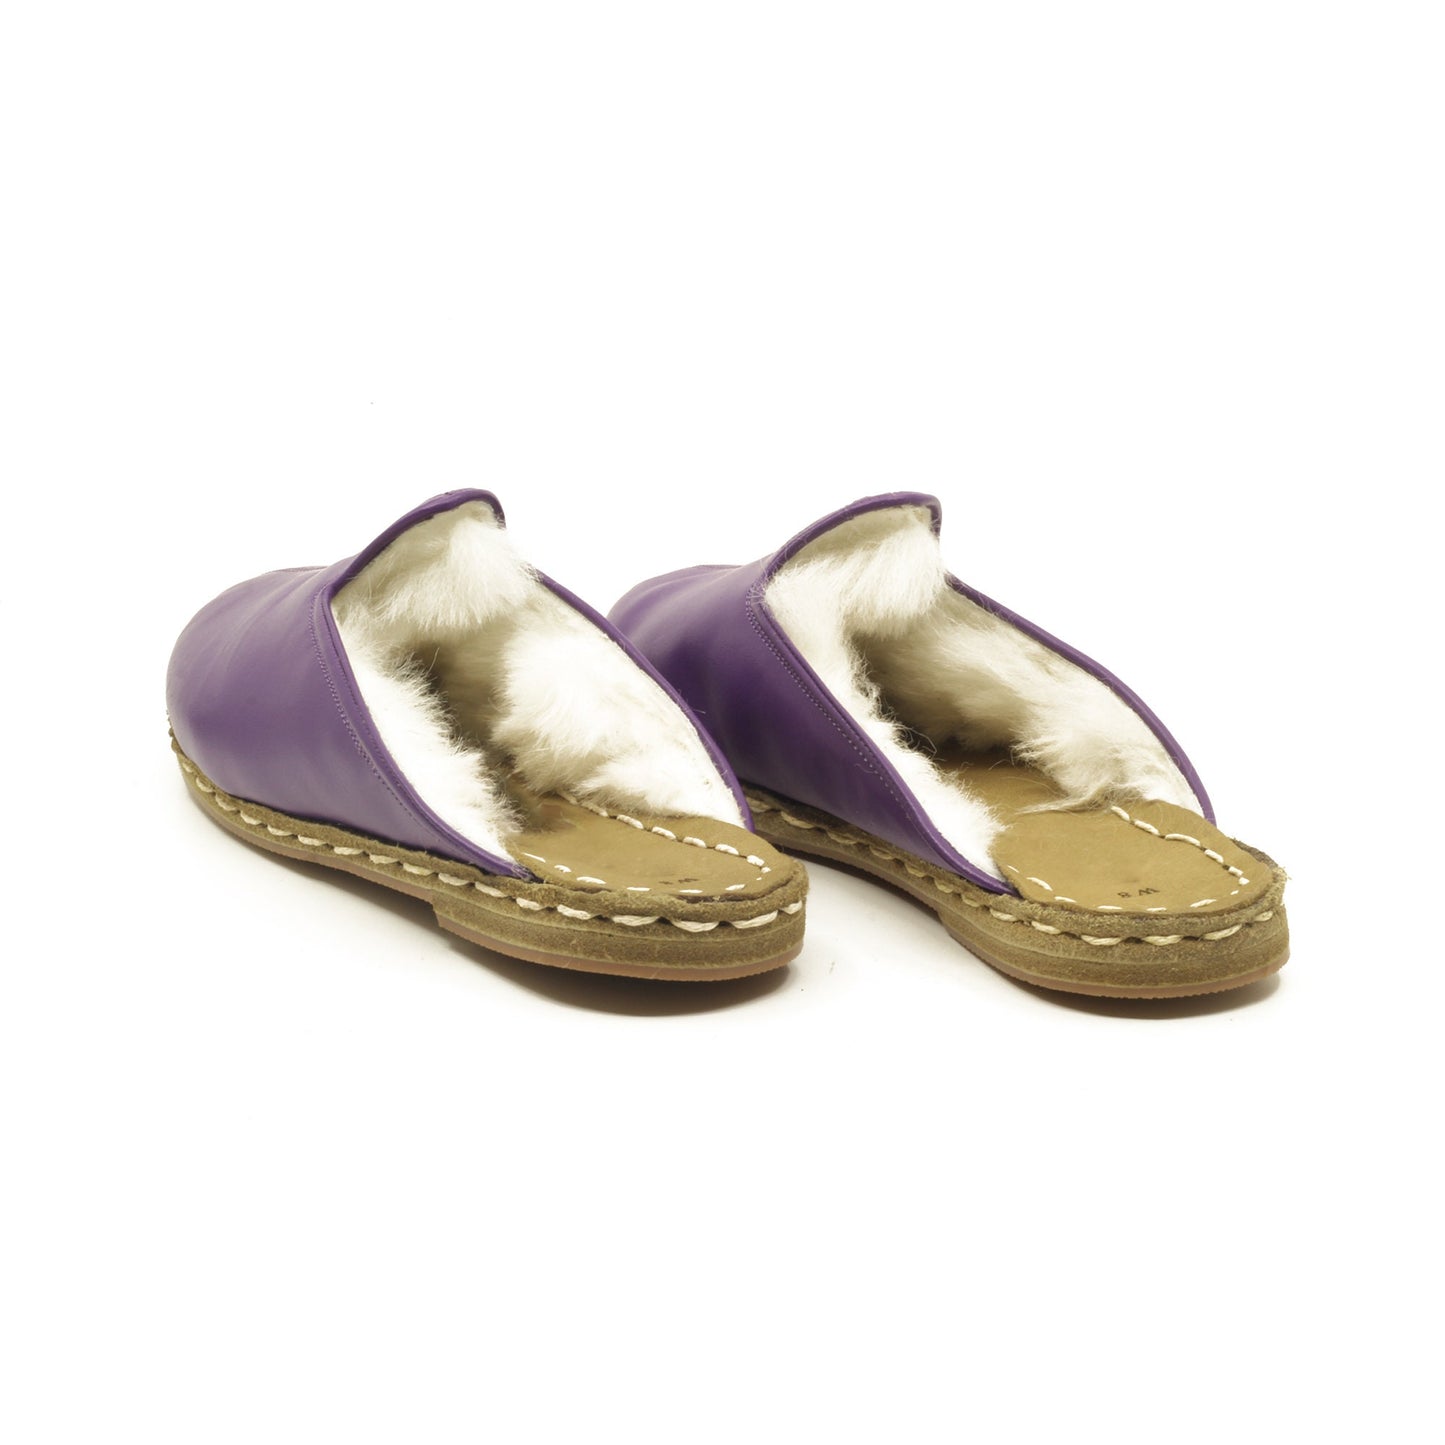 Winter Slippers  - Sheepskin slippers  - Close Toed Slippers - Purple Leather – Rubber Sole - For Women